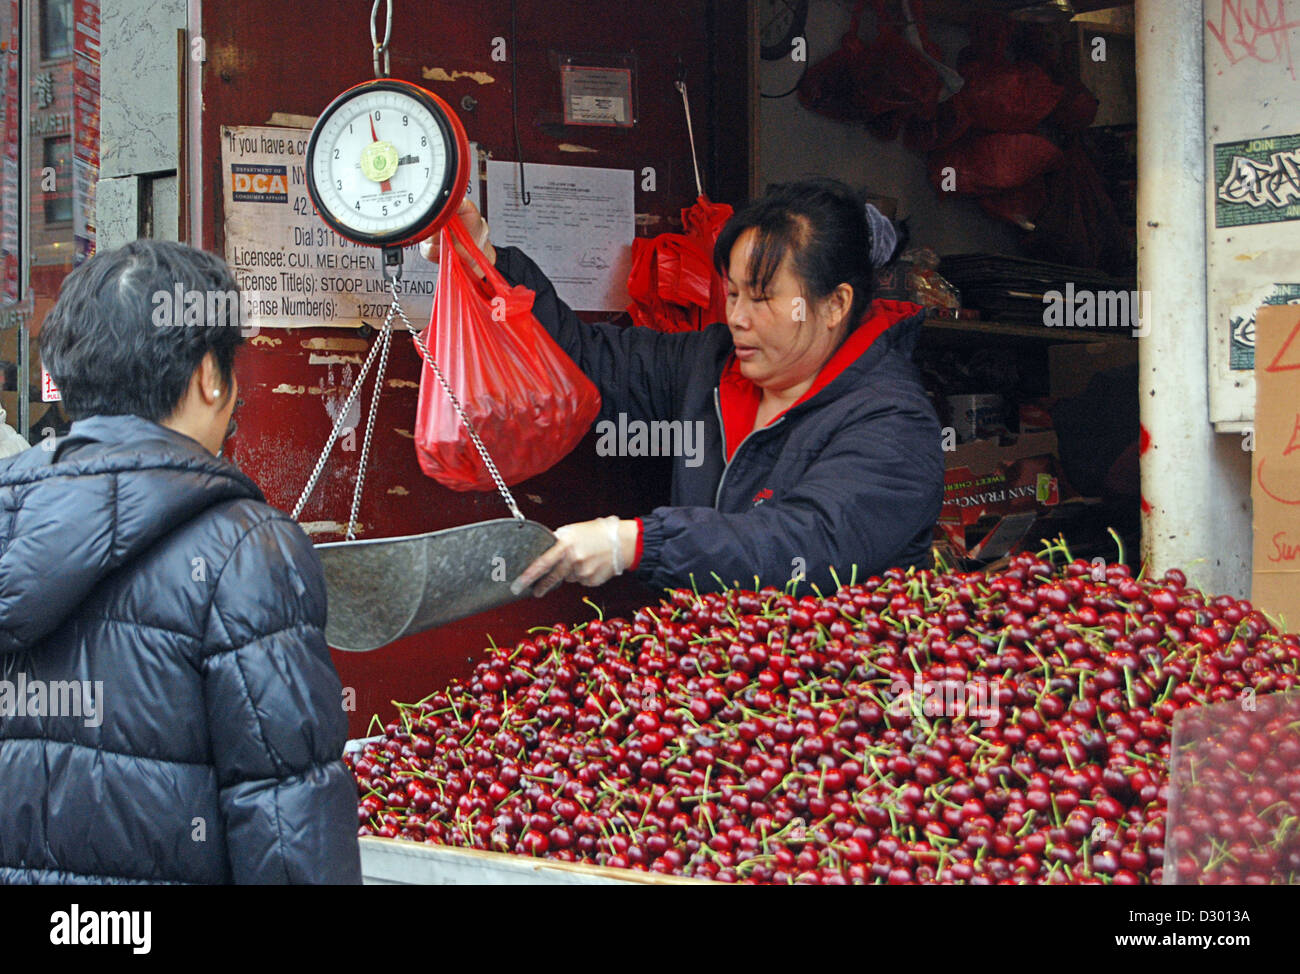 Canal Street, Chinatown, New York City. Cherries for sale, 4 pounds for 5 dollars. Stock Photo